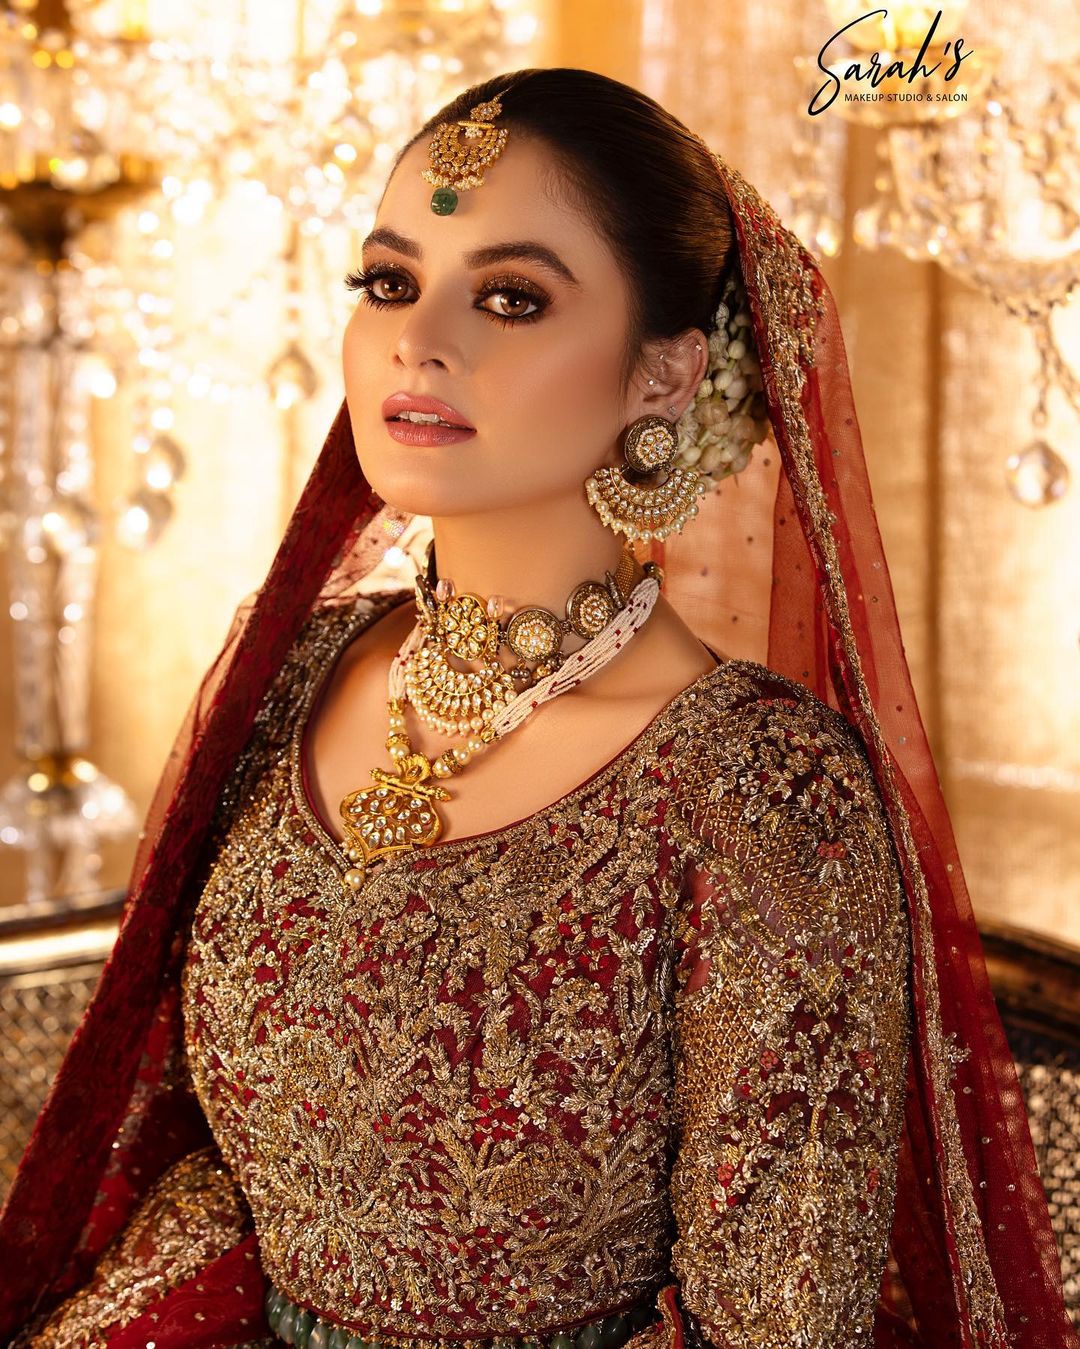 Minal Khan Looks Extremely Gorgeous In Latest Bridal Shoot Reviewitpk 7286